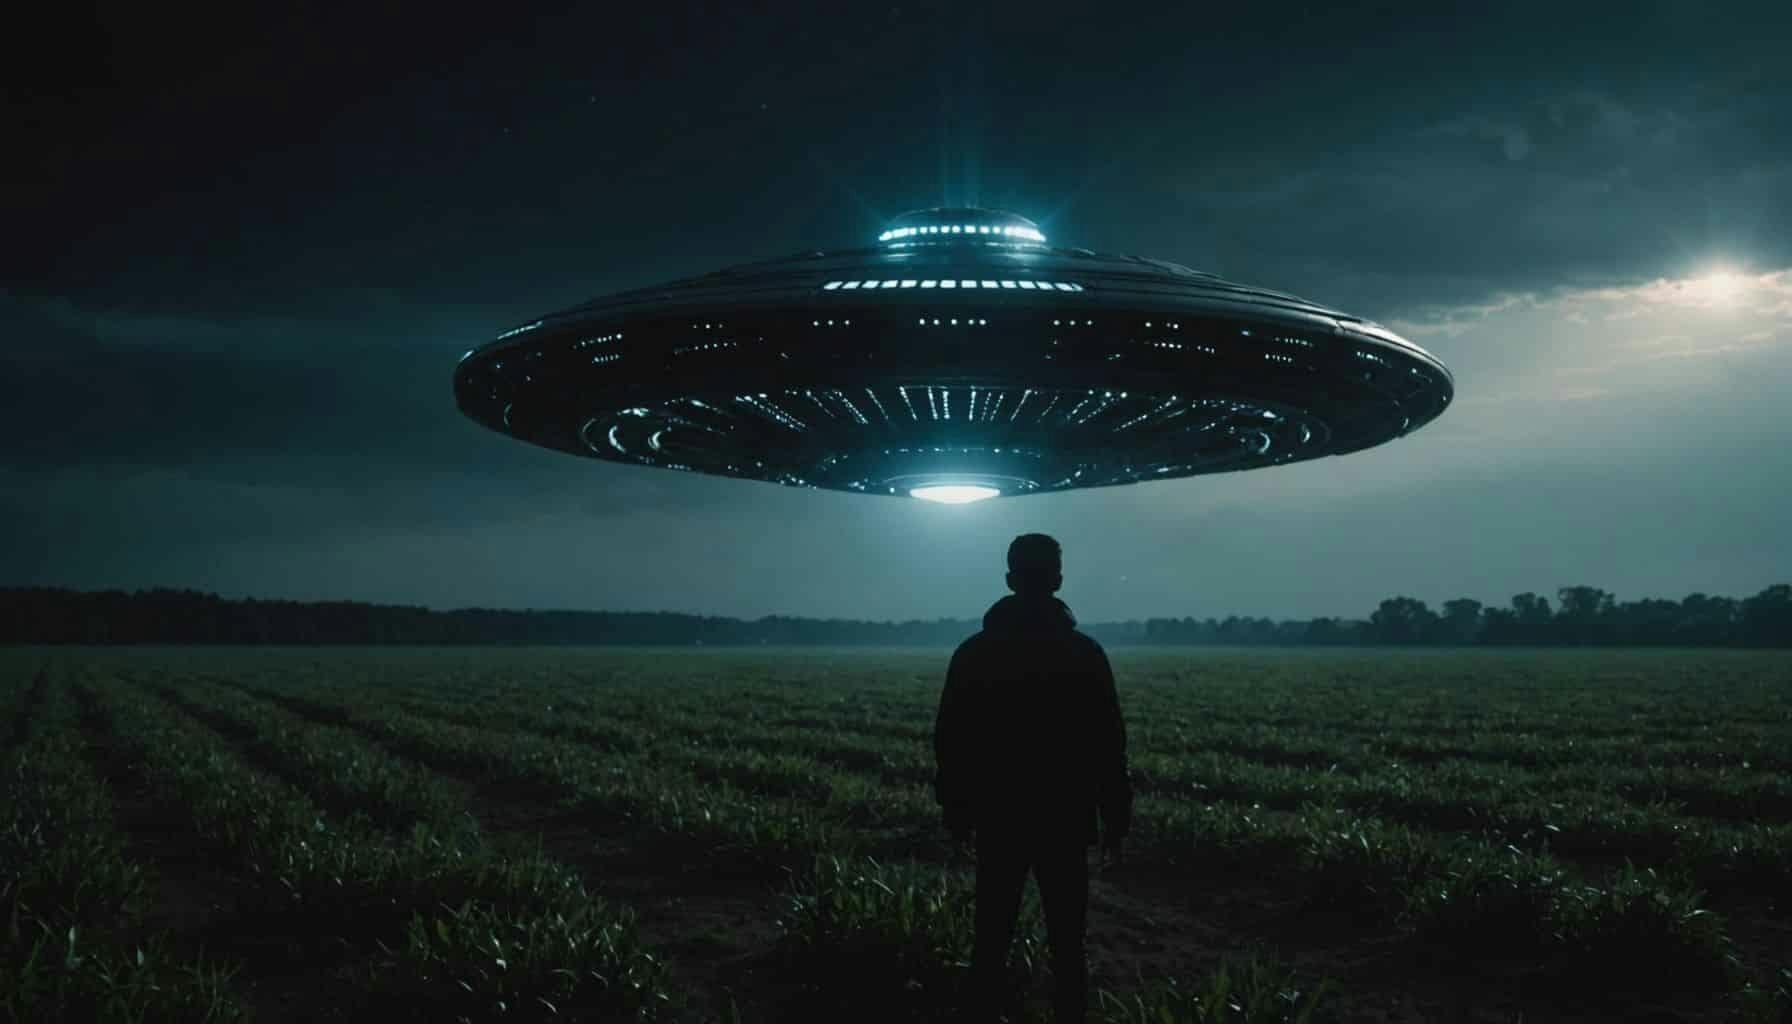 Alien Abductions: Real Encounters or Elaborate Hoaxes?